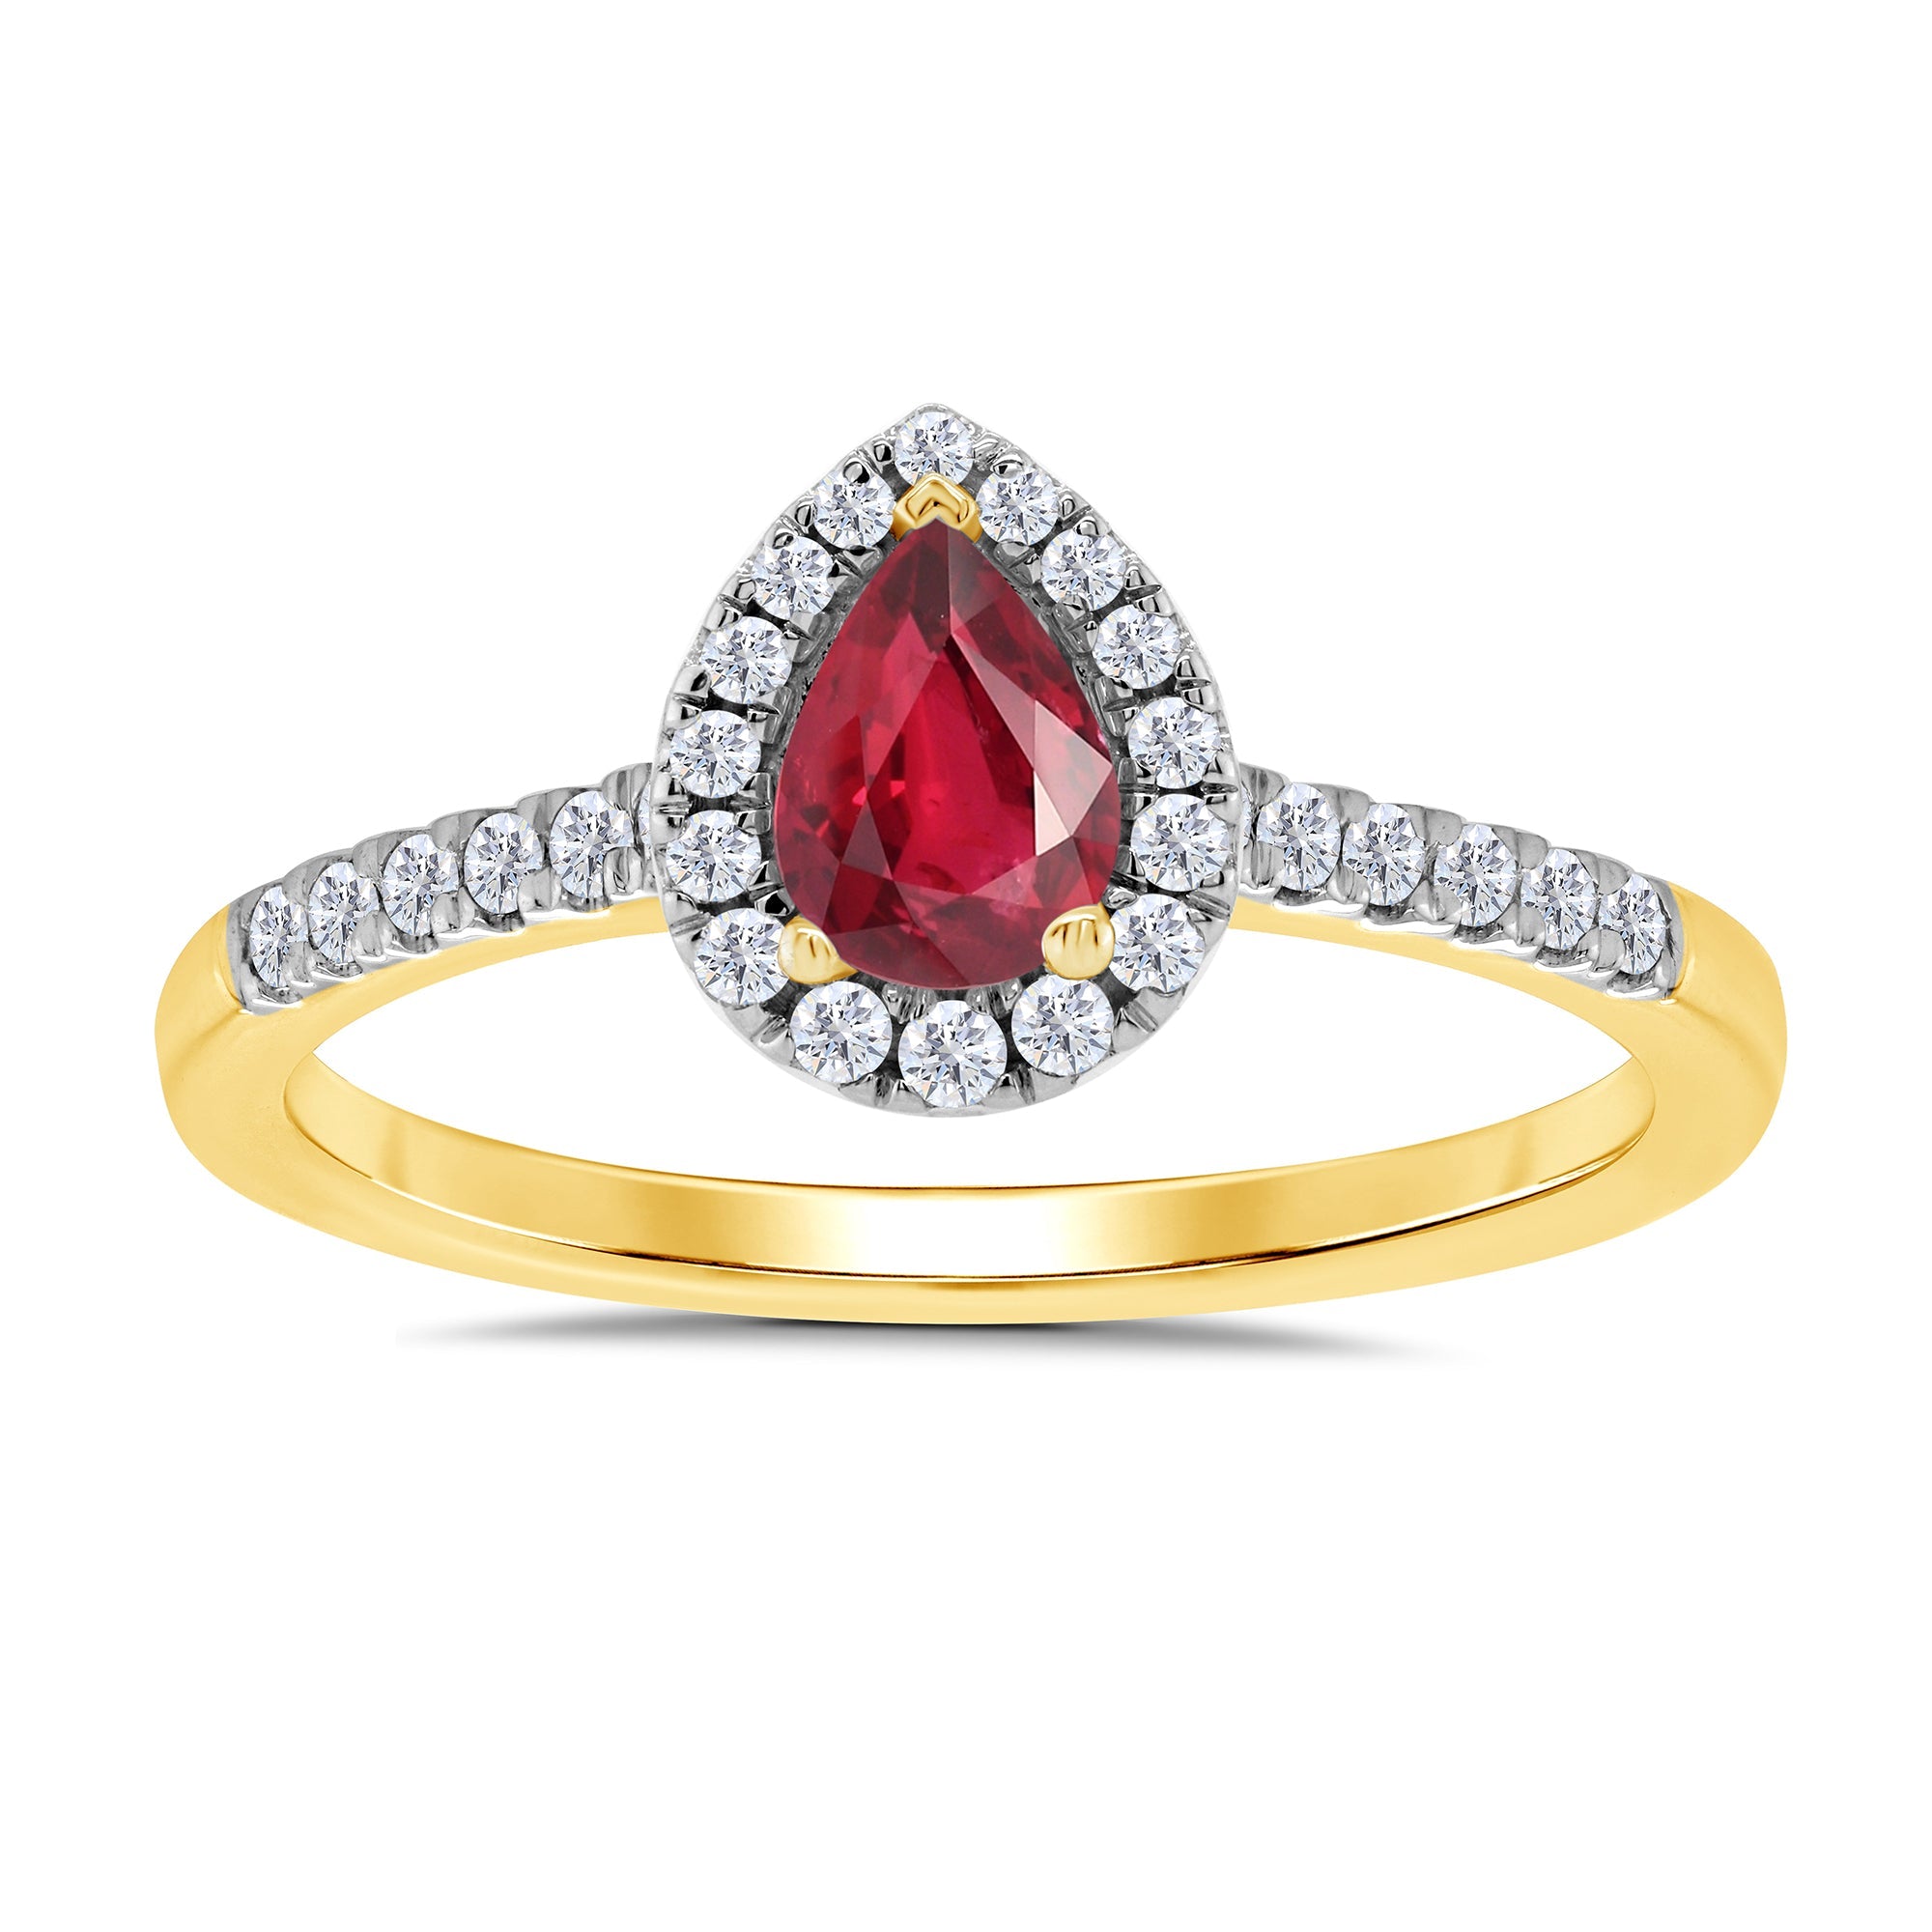 9ct gold 6x4mm pear shape ruby & diamond cluster ring with diamond set shoulders 0.20ct